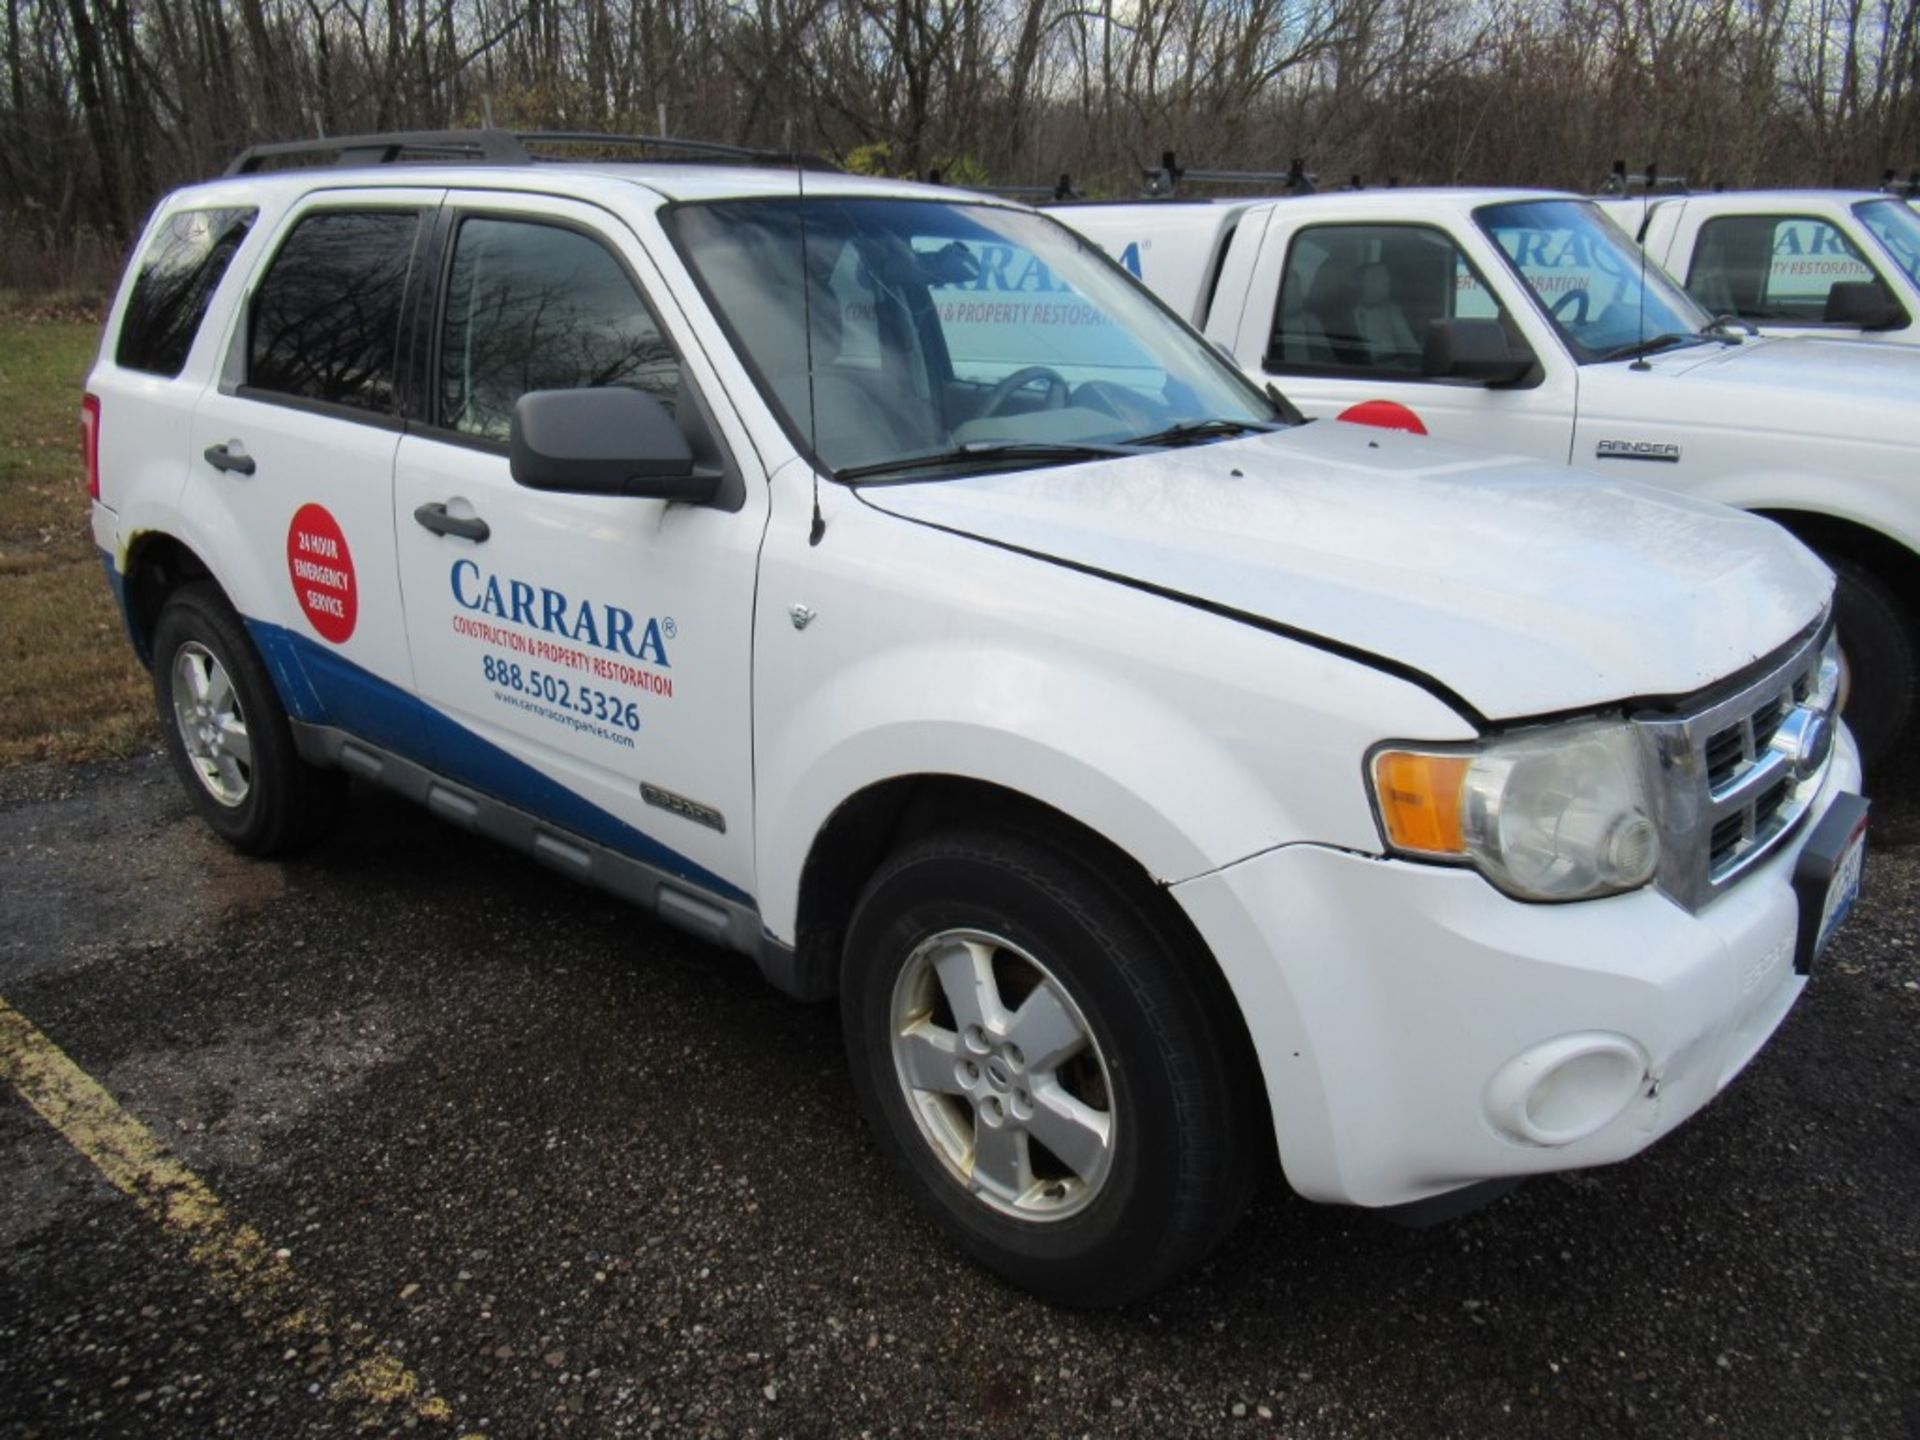 2008 Ford Escape XLT SUV , VIN 1FMCU02118KD90320, Automatic, Cruise Control, AC, PW, PL, PS, AM/FM/ - Image 4 of 31